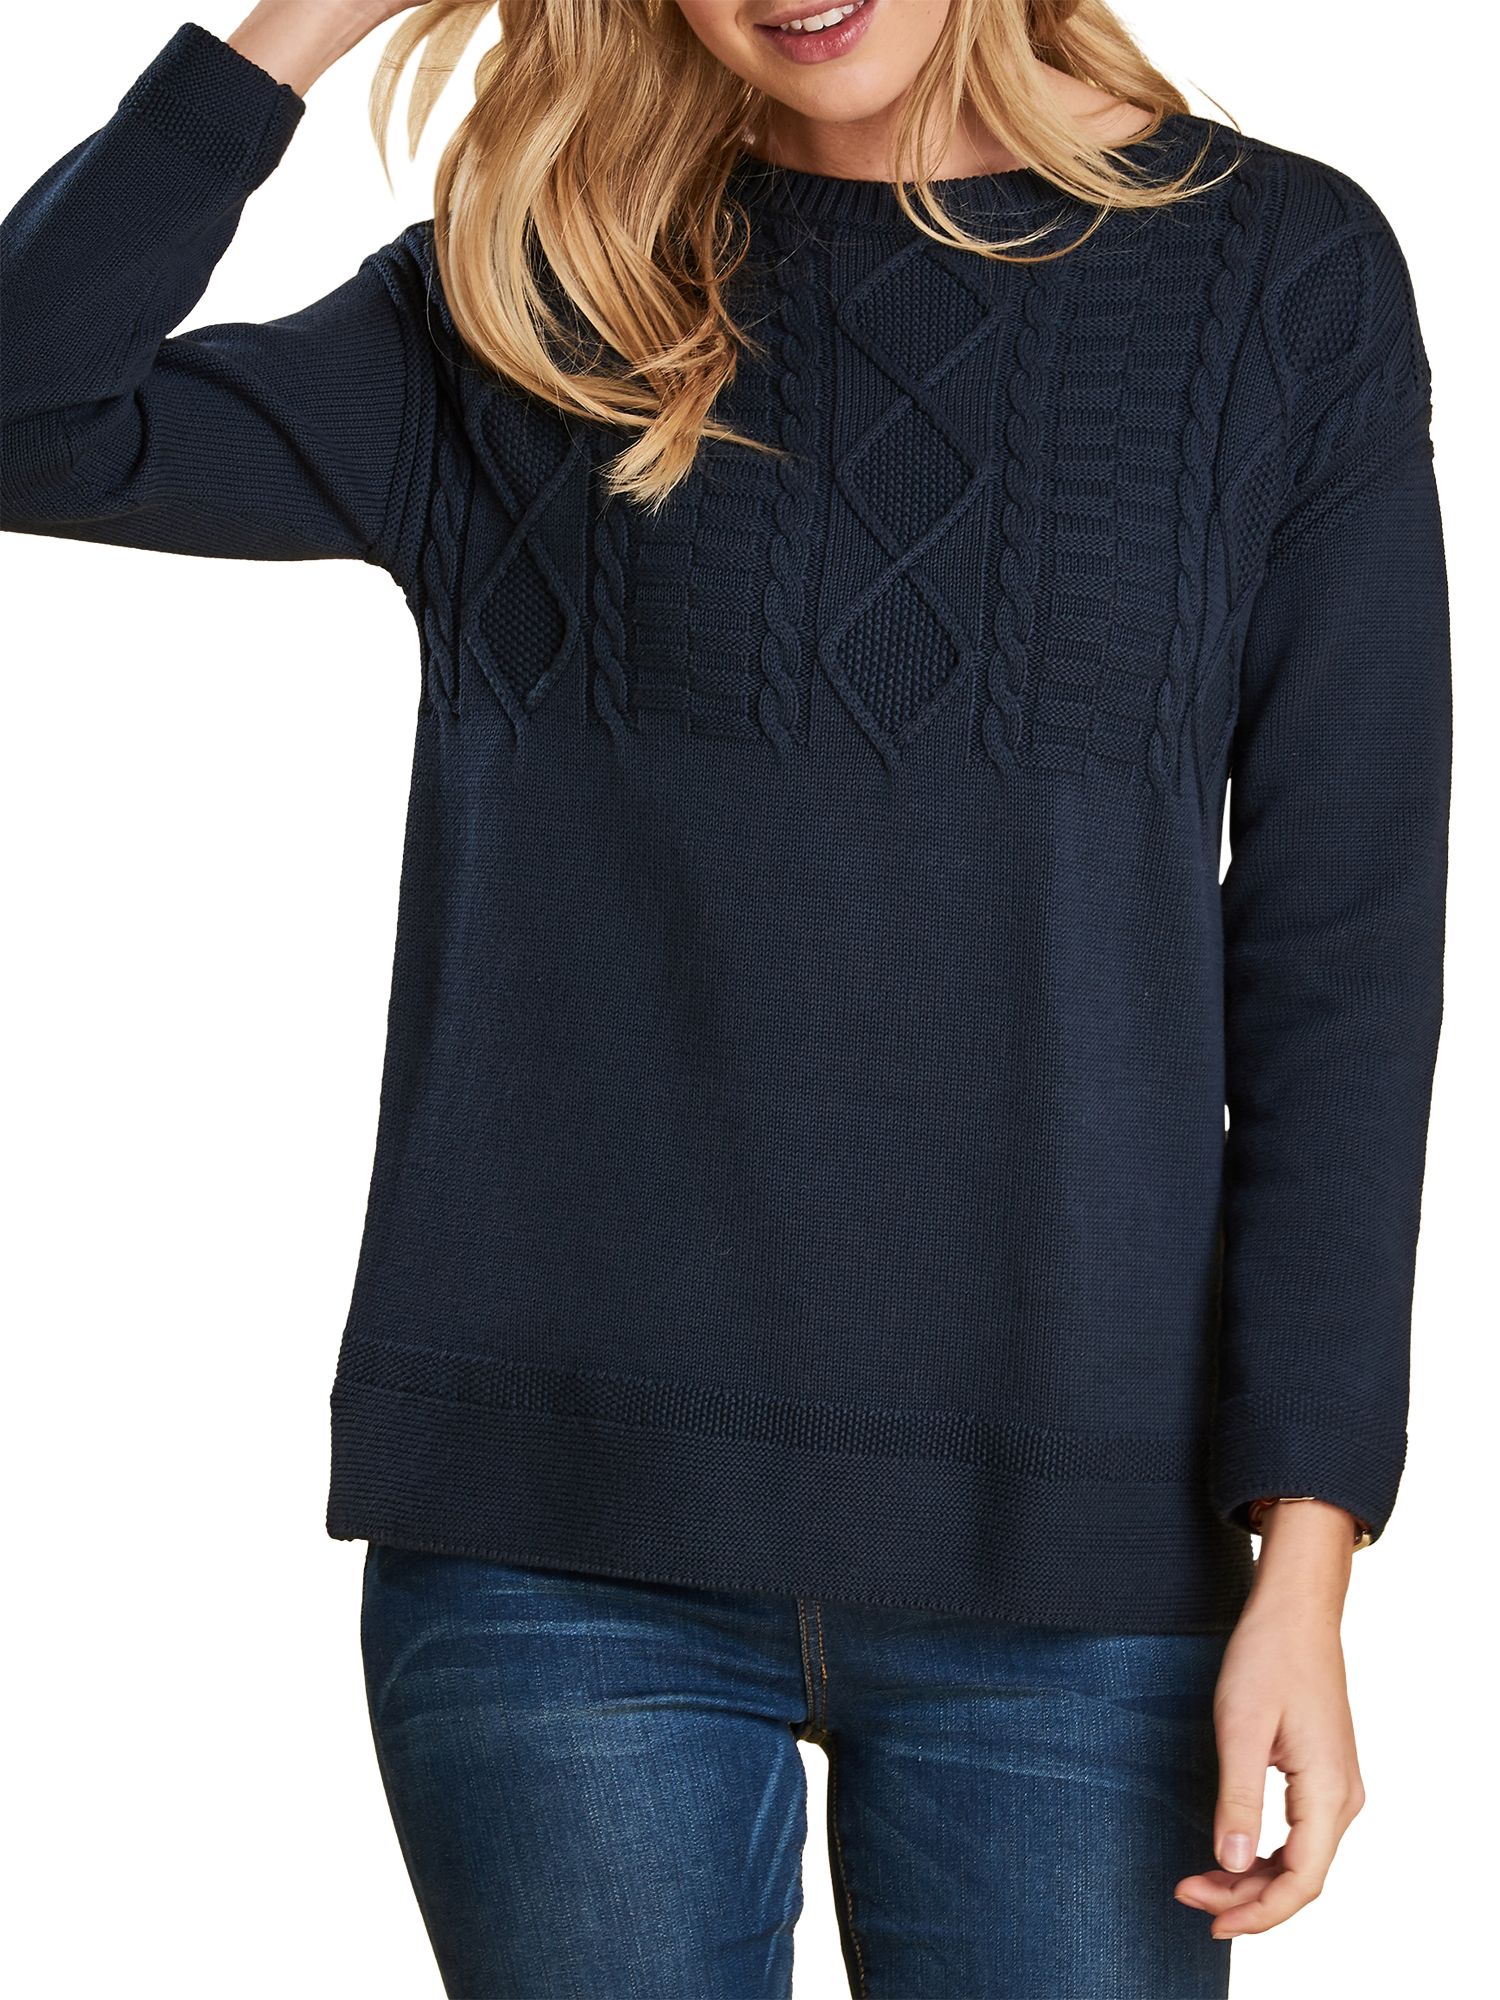 barbour sweater womens